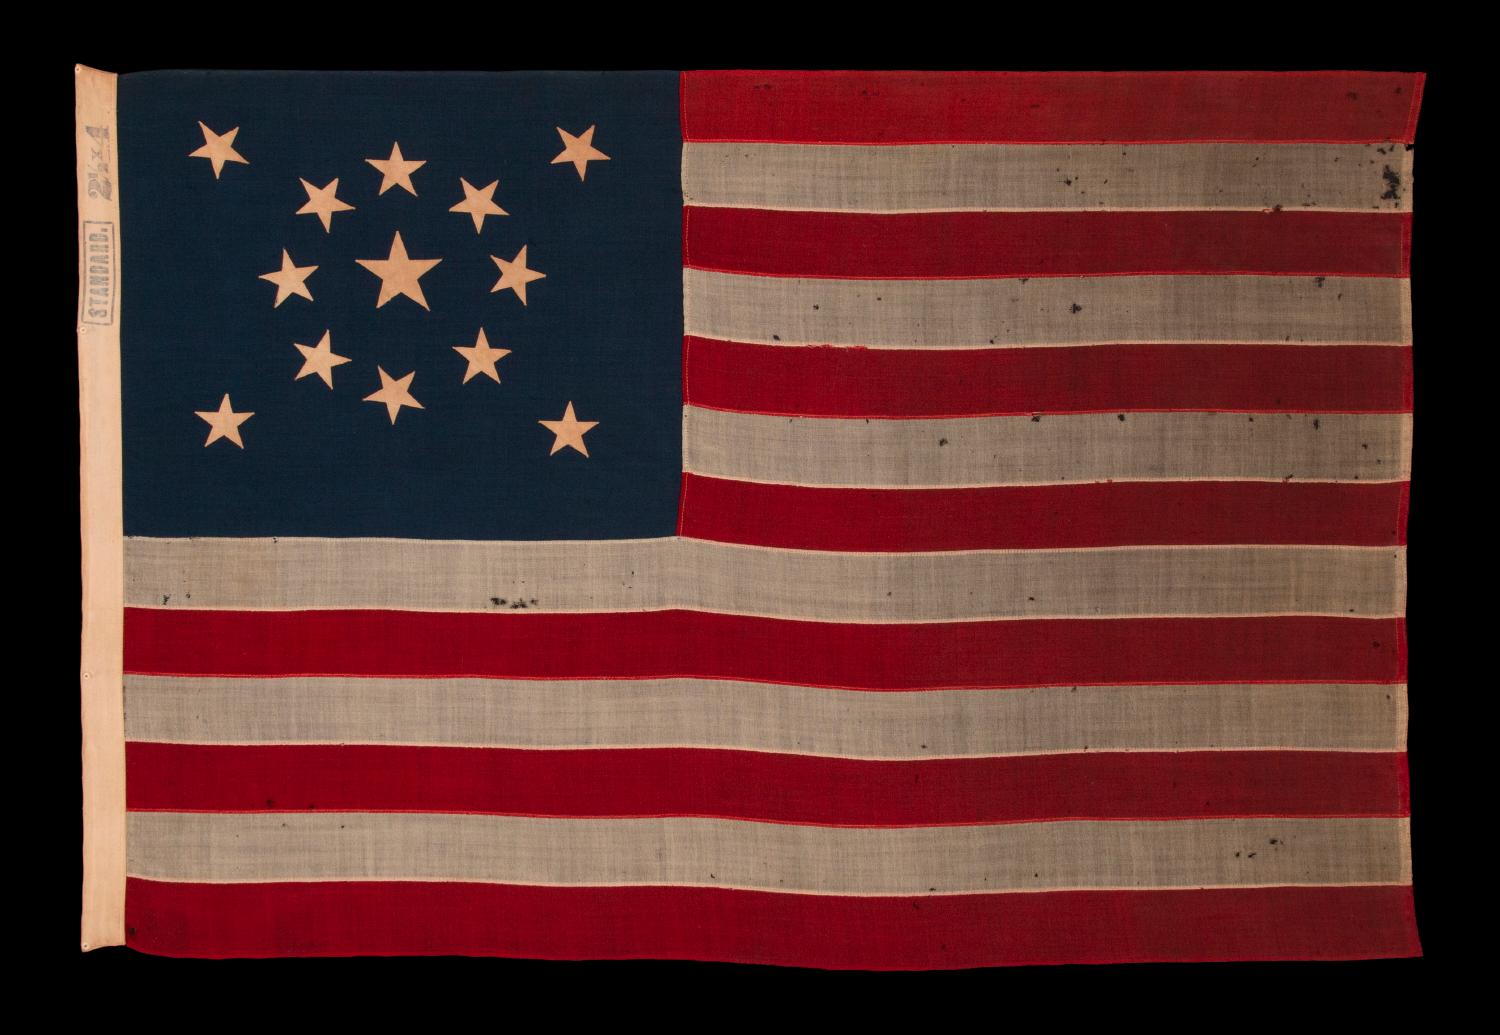 13 STARS IN A MEDALLION CONFIGURATION ON A SMALL-SCALE ANTIQUE AMERICAN FLAG OF THE 1895-1926 ERA, MARKED 